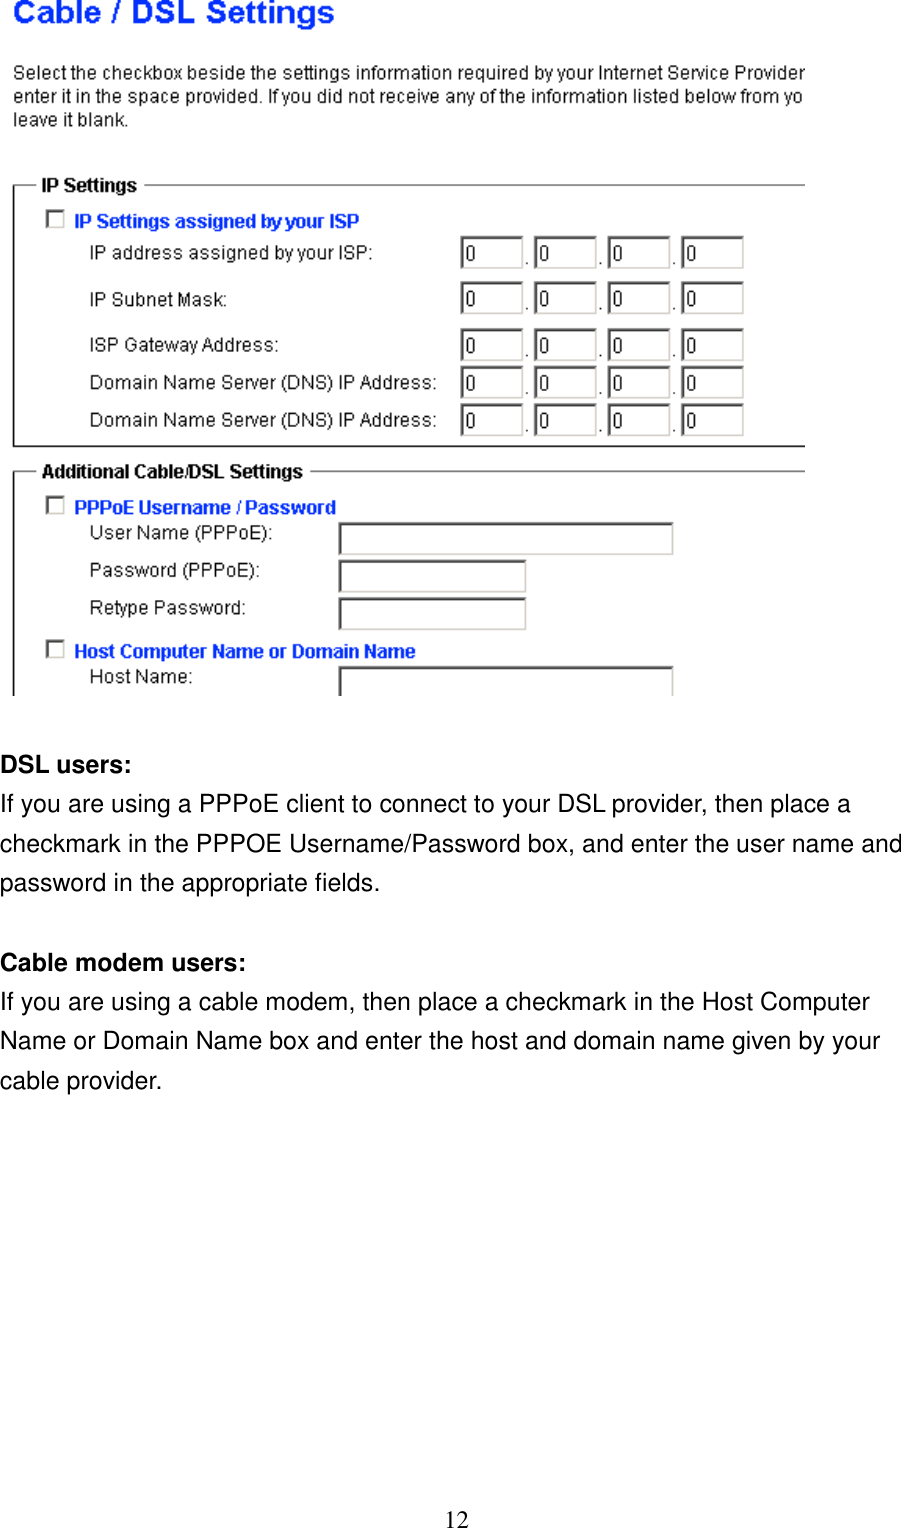 12DSL users:If you are using a PPPoE client to connect to your DSL provider, then place acheckmark in the PPPOE Username/Password box, and enter the user name andpassword in the appropriate fields.Cable modem users:If you are using a cable modem, then place a checkmark in the Host ComputerName or Domain Name box and enter the host and domain name given by yourcable provider.  